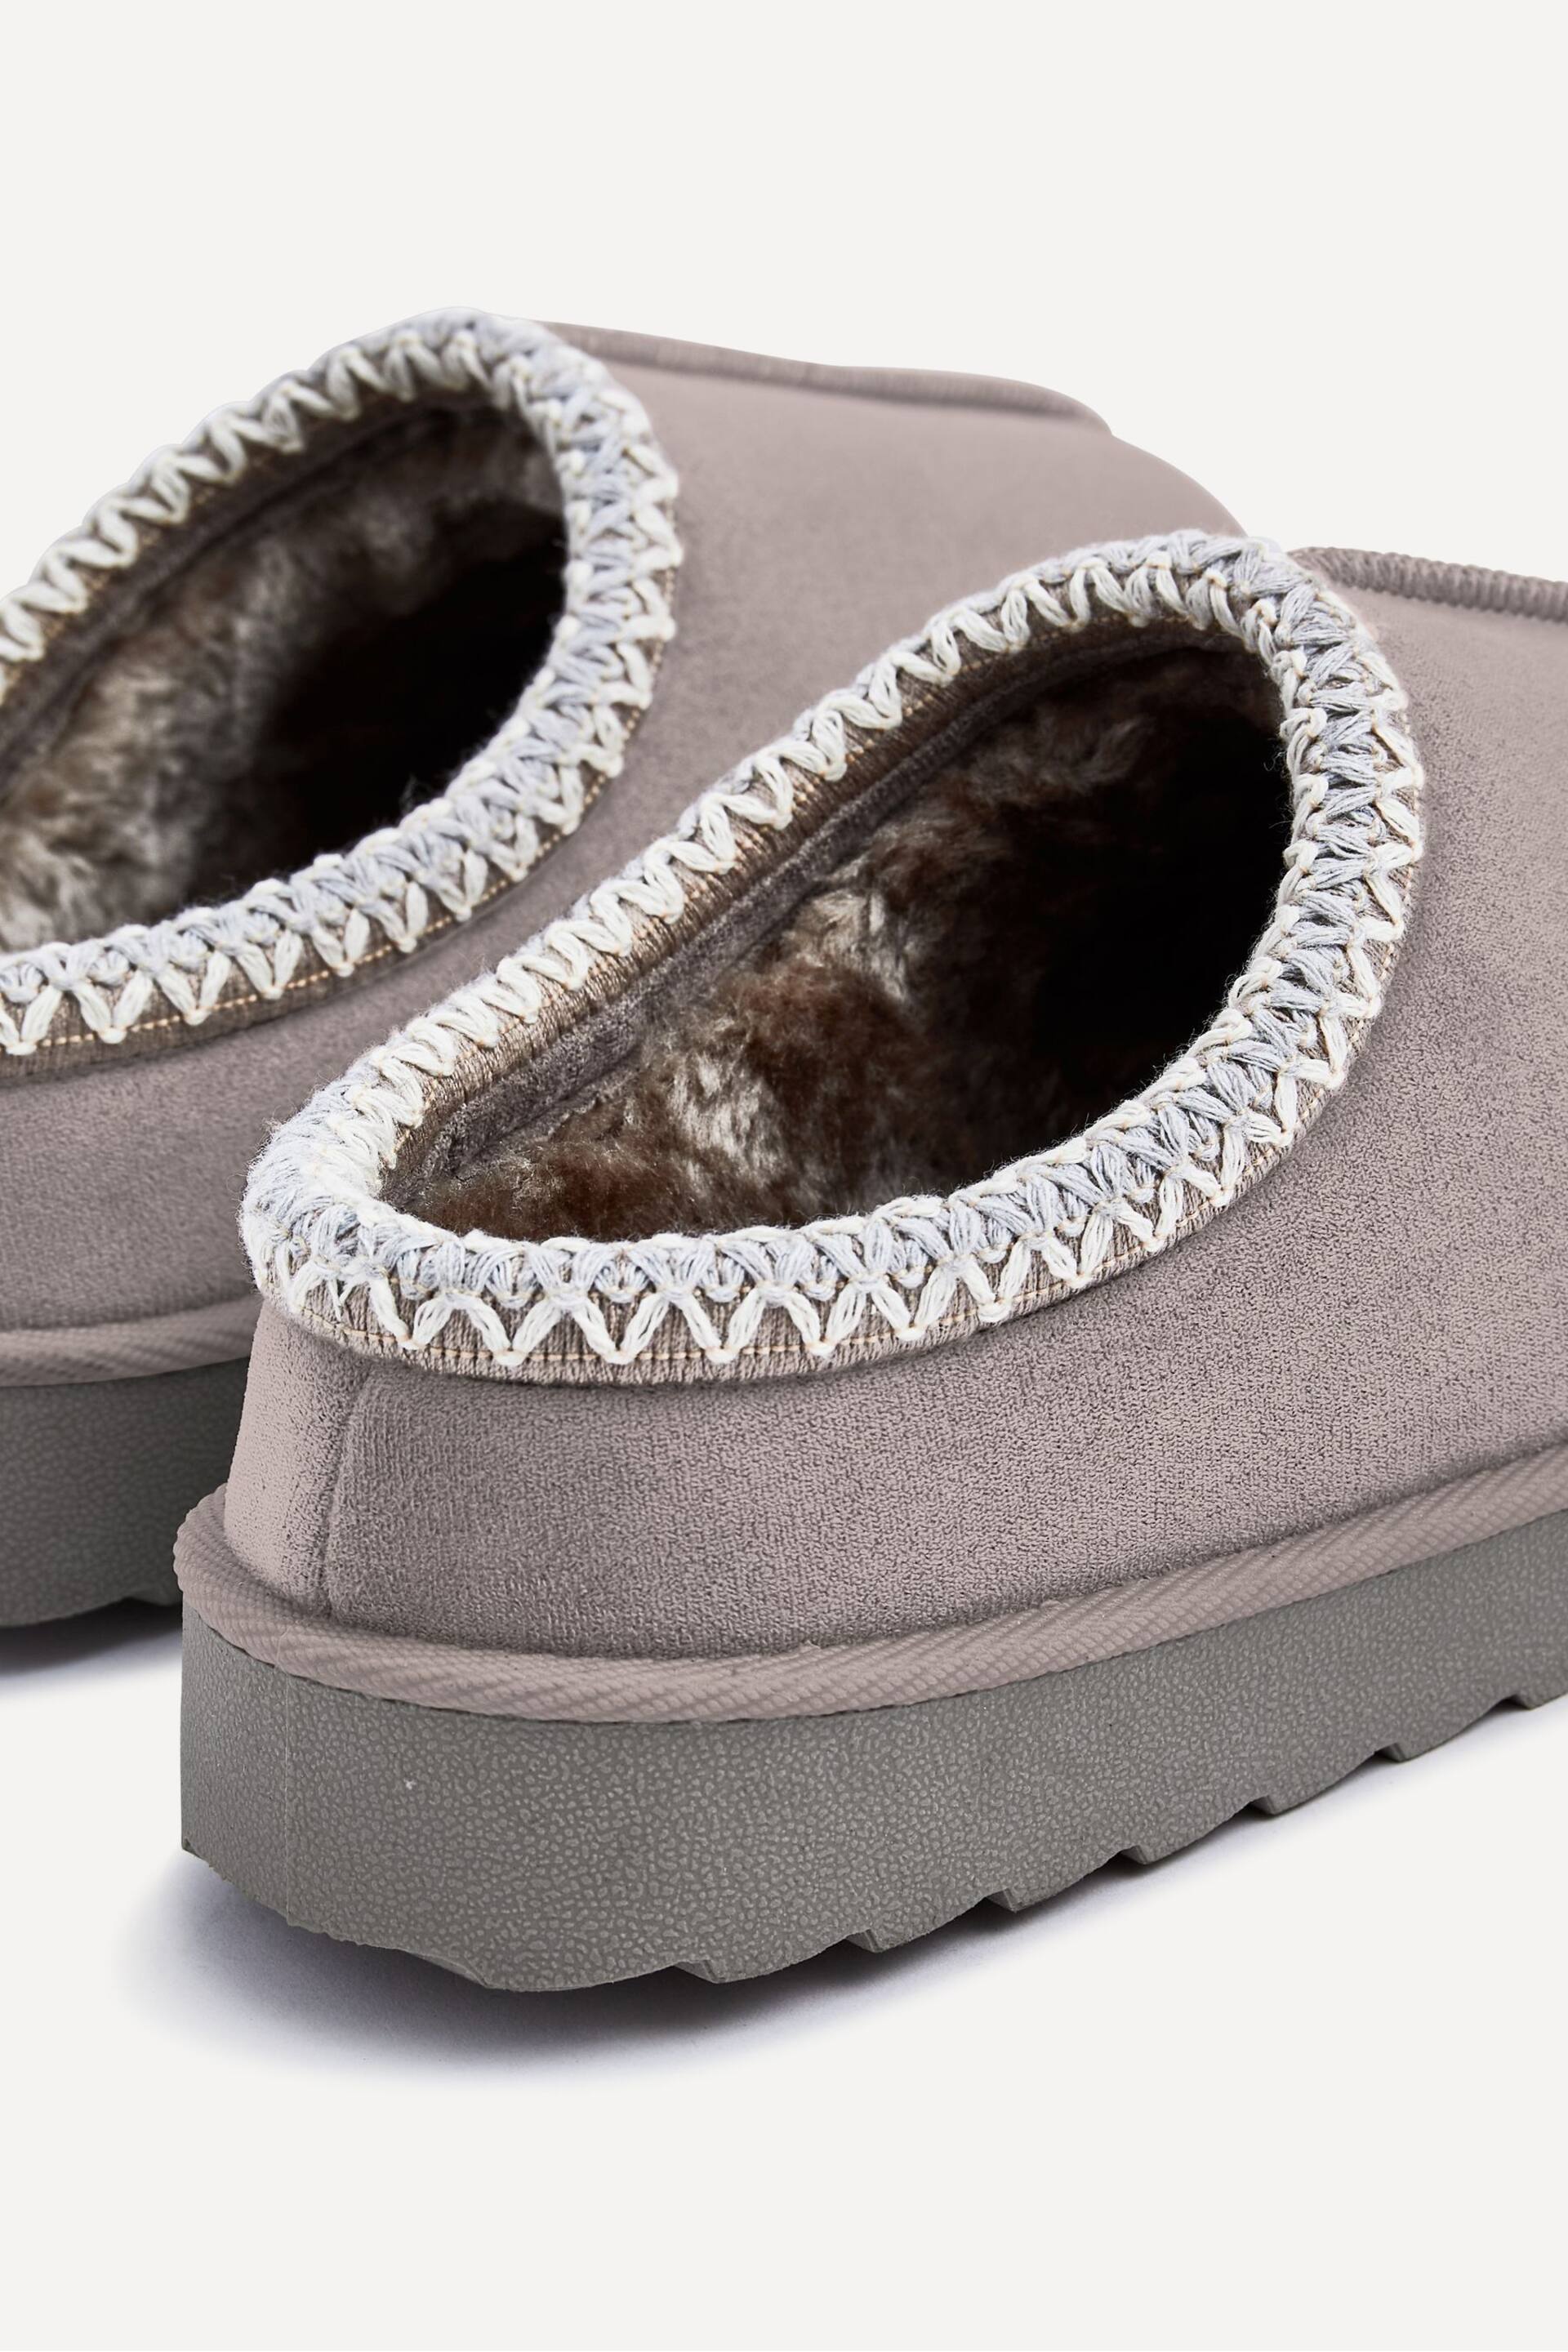 Linzi Grey Tana Faux Suede Slip-On Slippers With Aztec Detail - Image 5 of 5